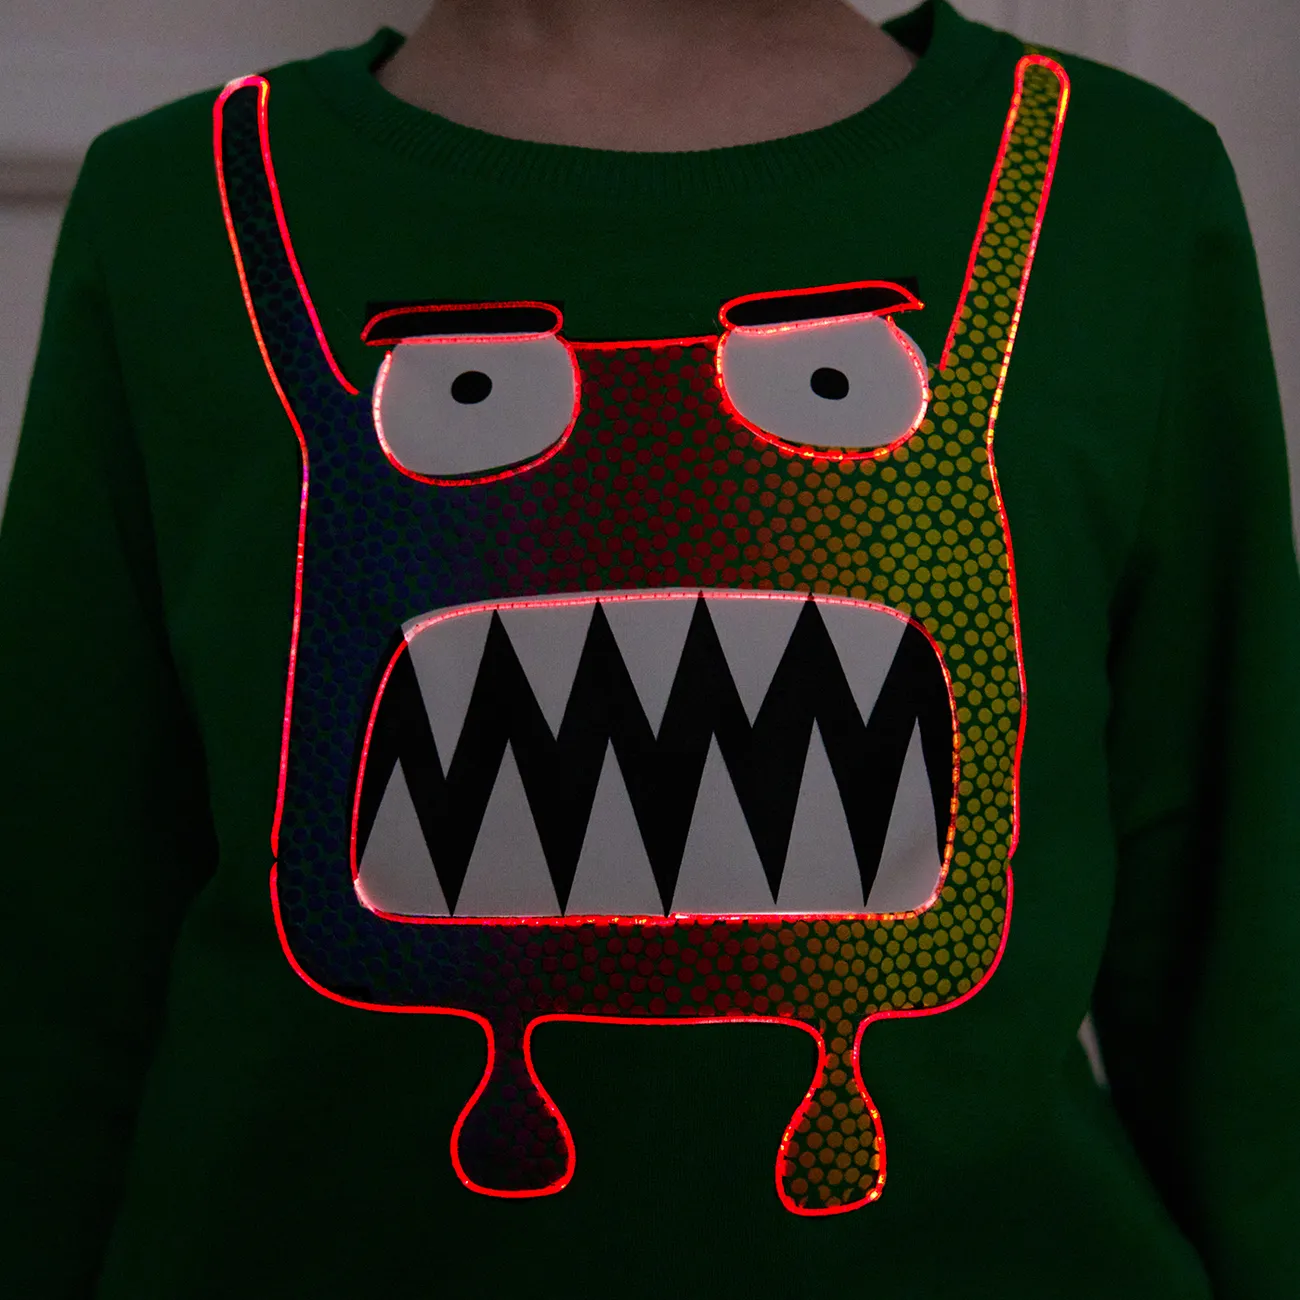 Go-Glow Illuminating Sweatshirt with Light Up Monster Including Controller (Built-In Battery) Green big image 1